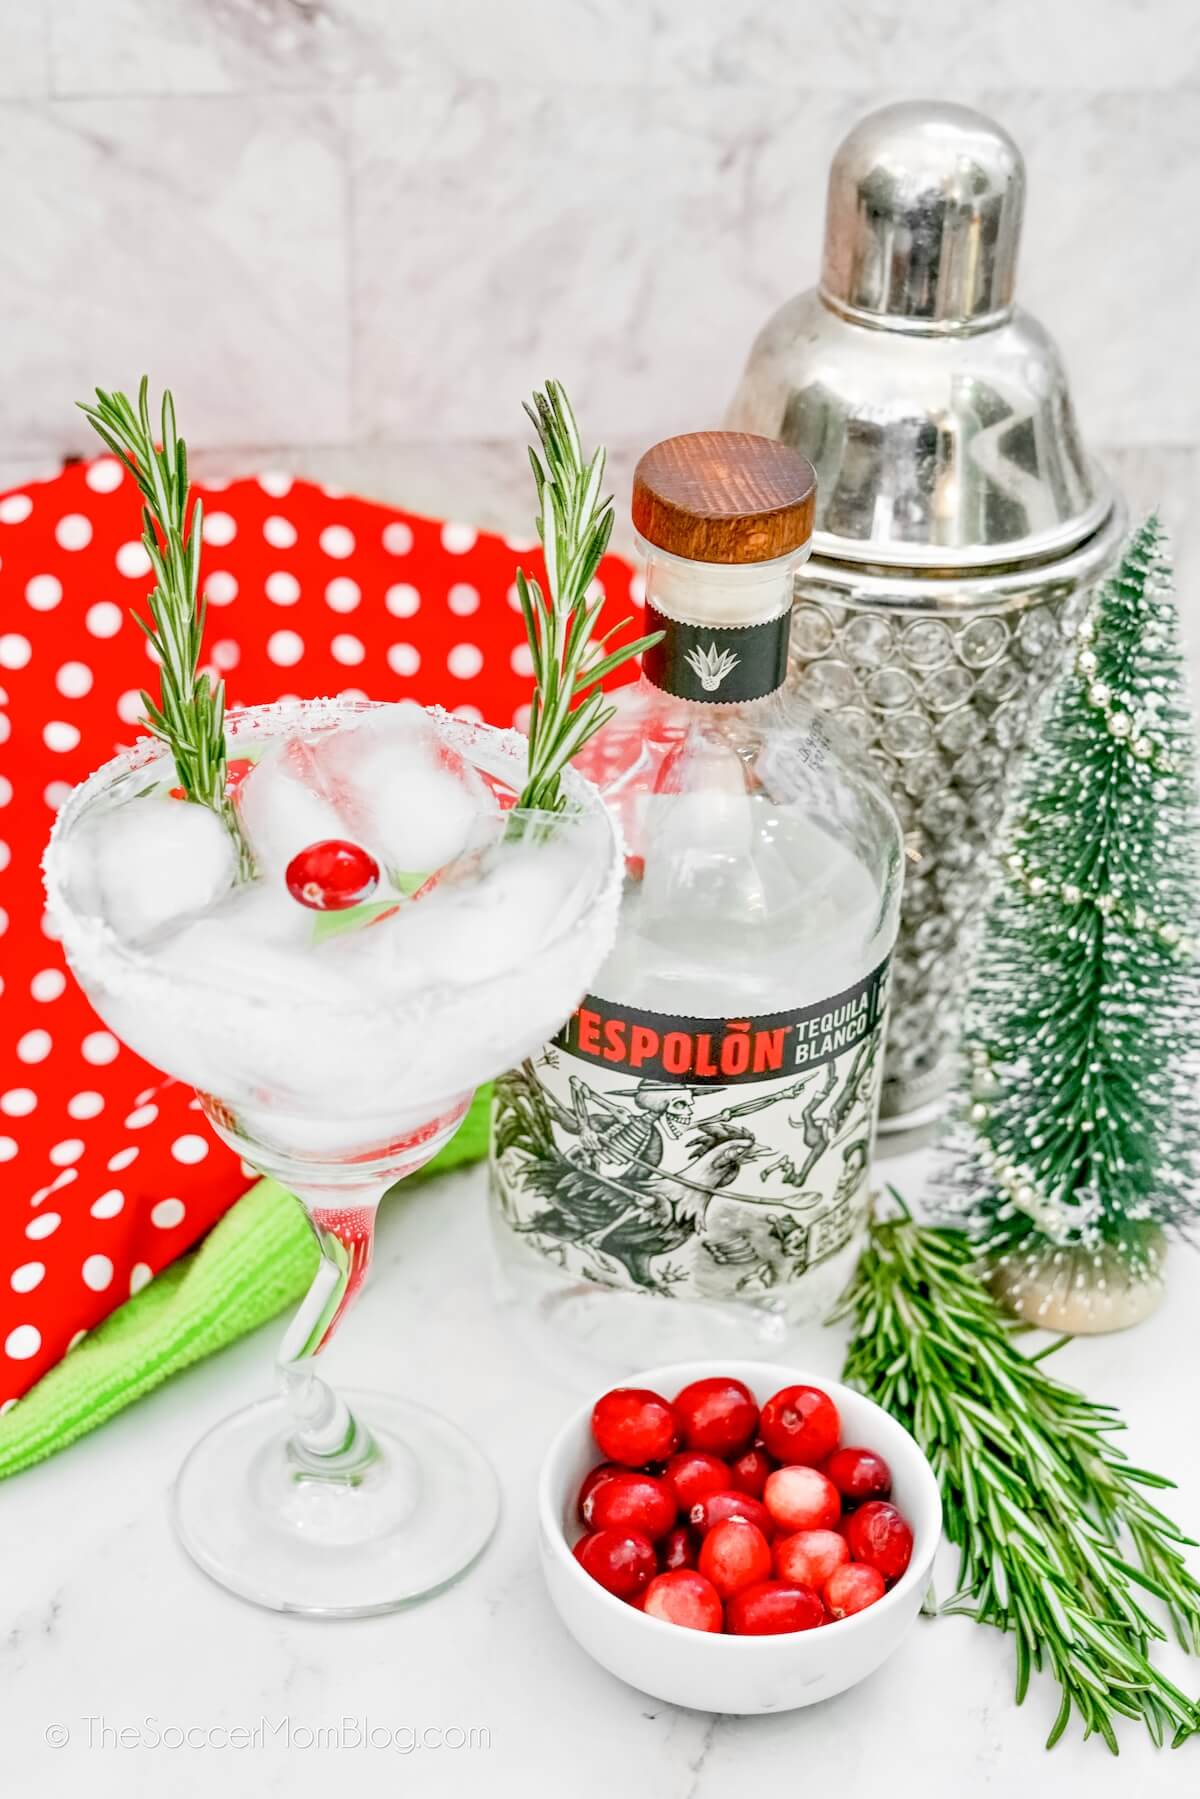 ingredients to make White Christmas Margaritas, with a finished cocktail